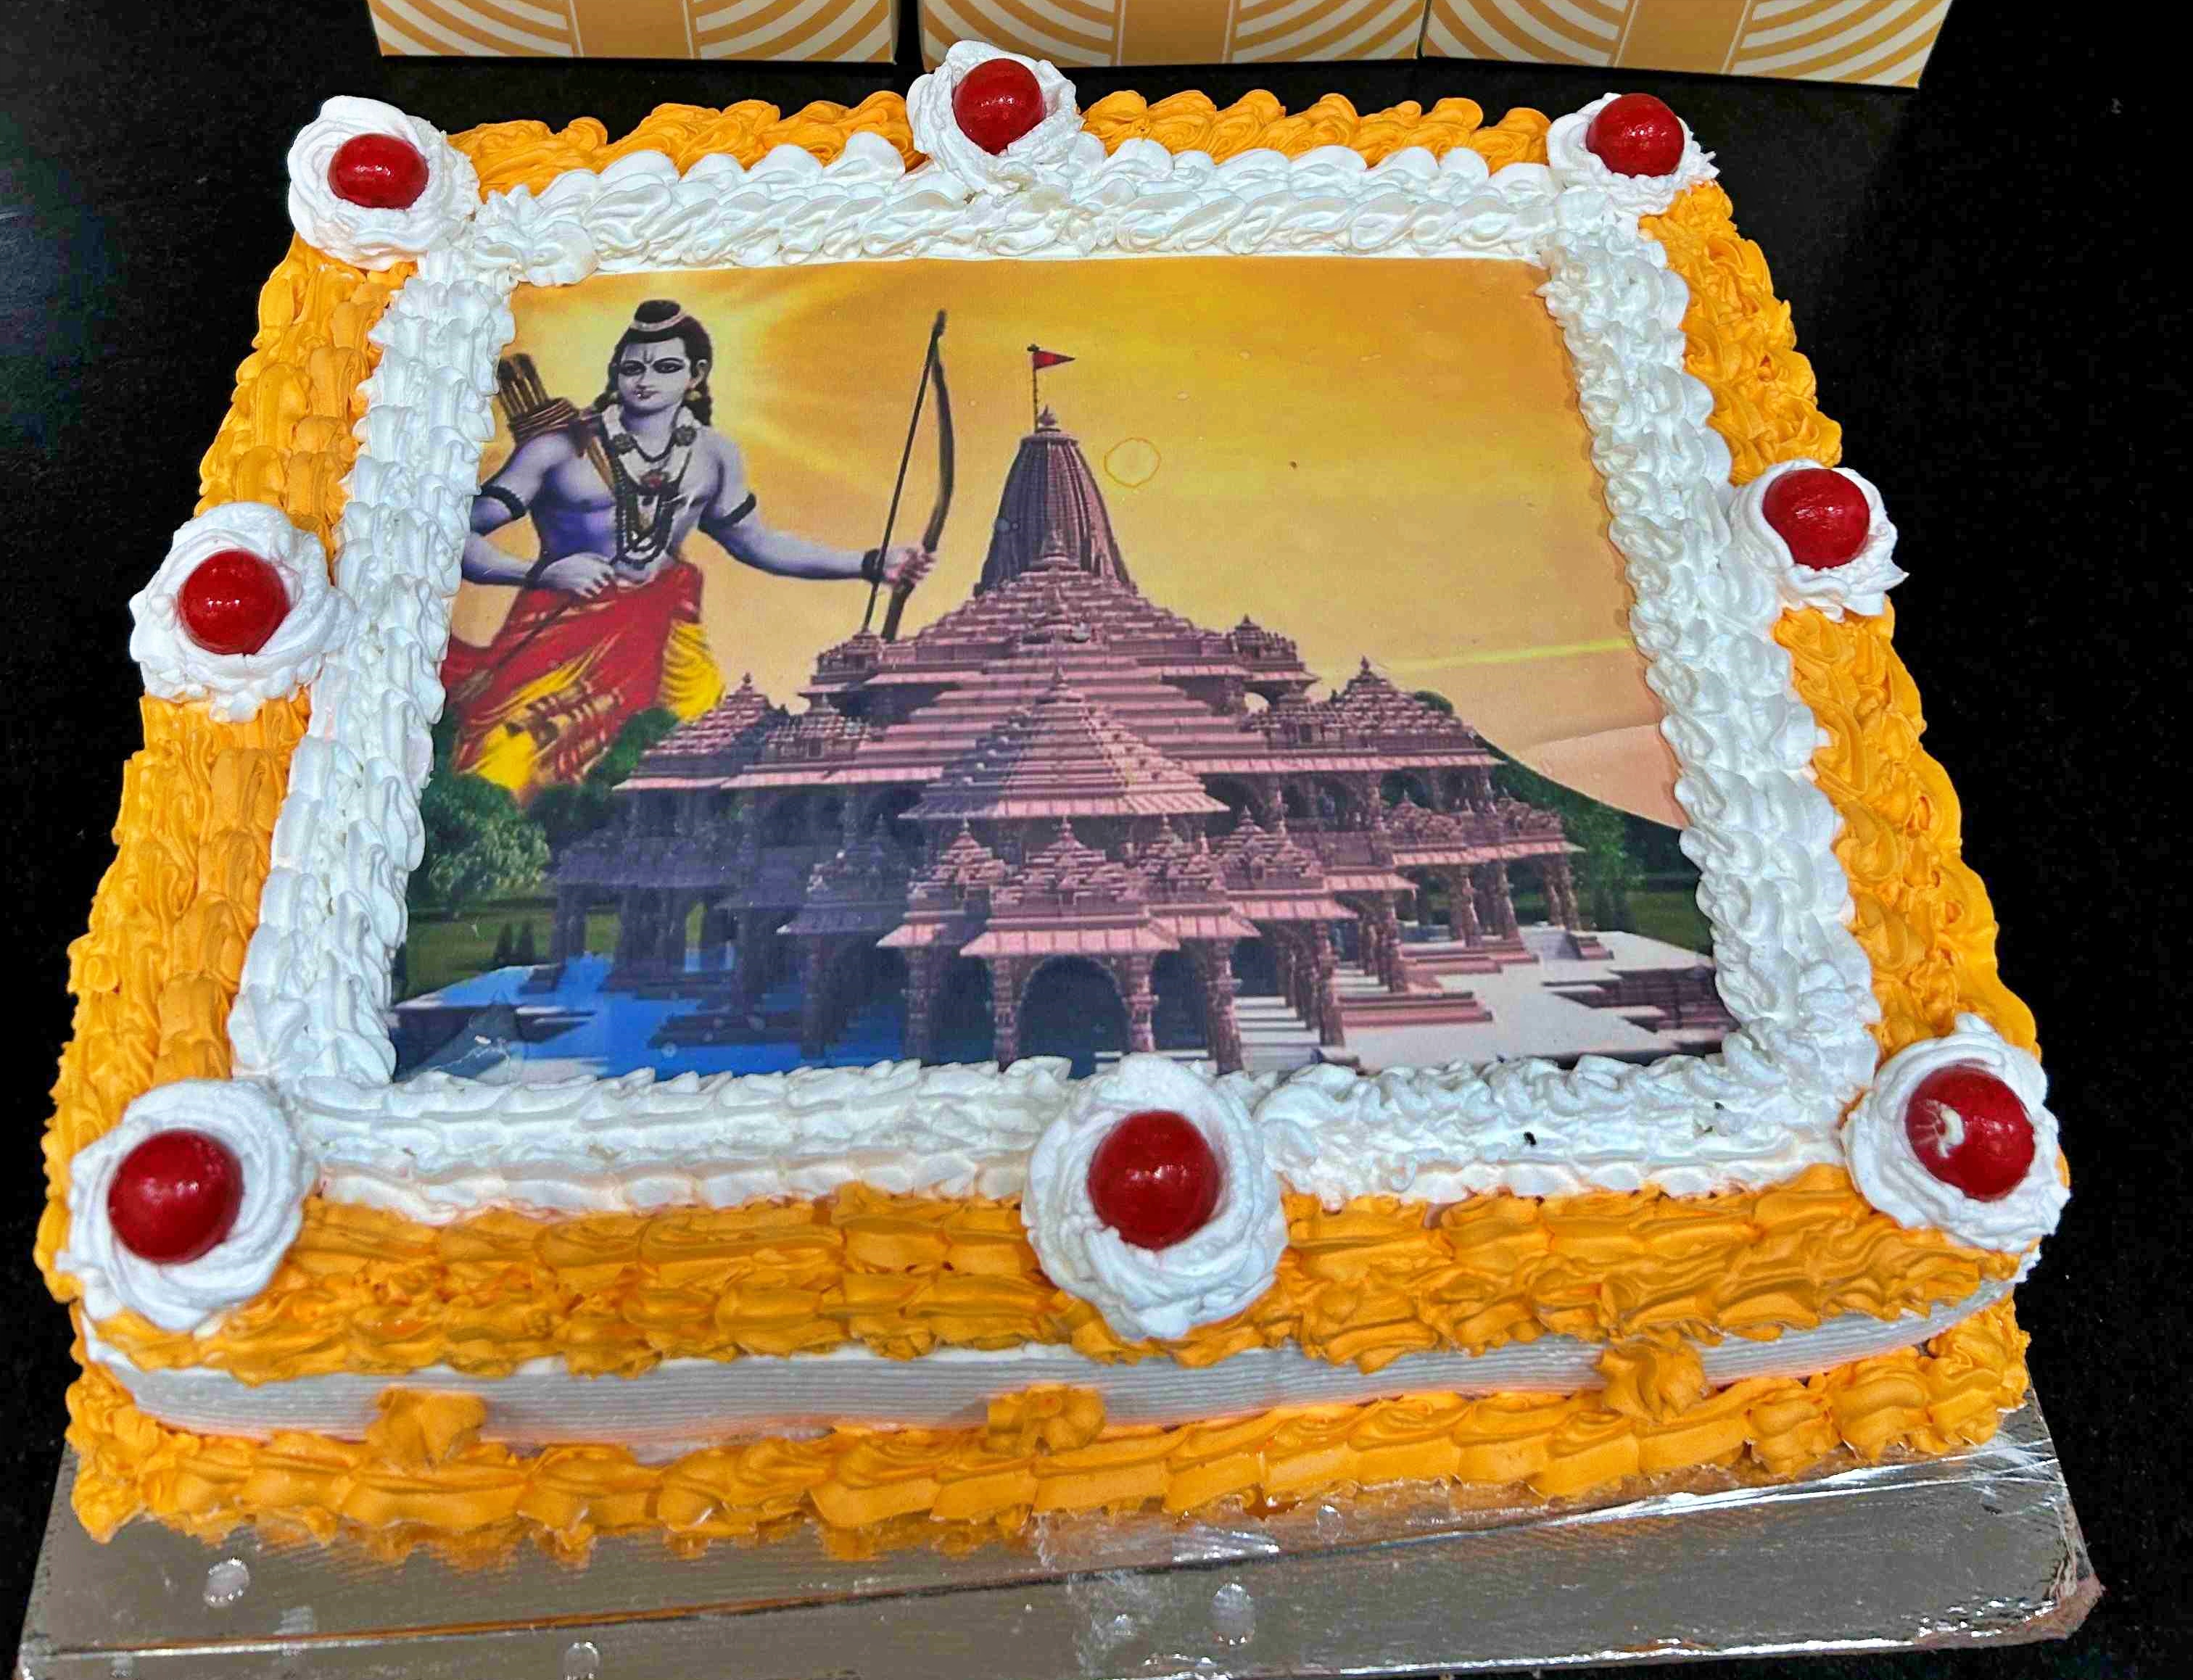 WATCH: Kamal Nath cuts temple-shaped cake with pic of lord Hanuman, BJP  says 'insulting Hindus' | India News, Times Now